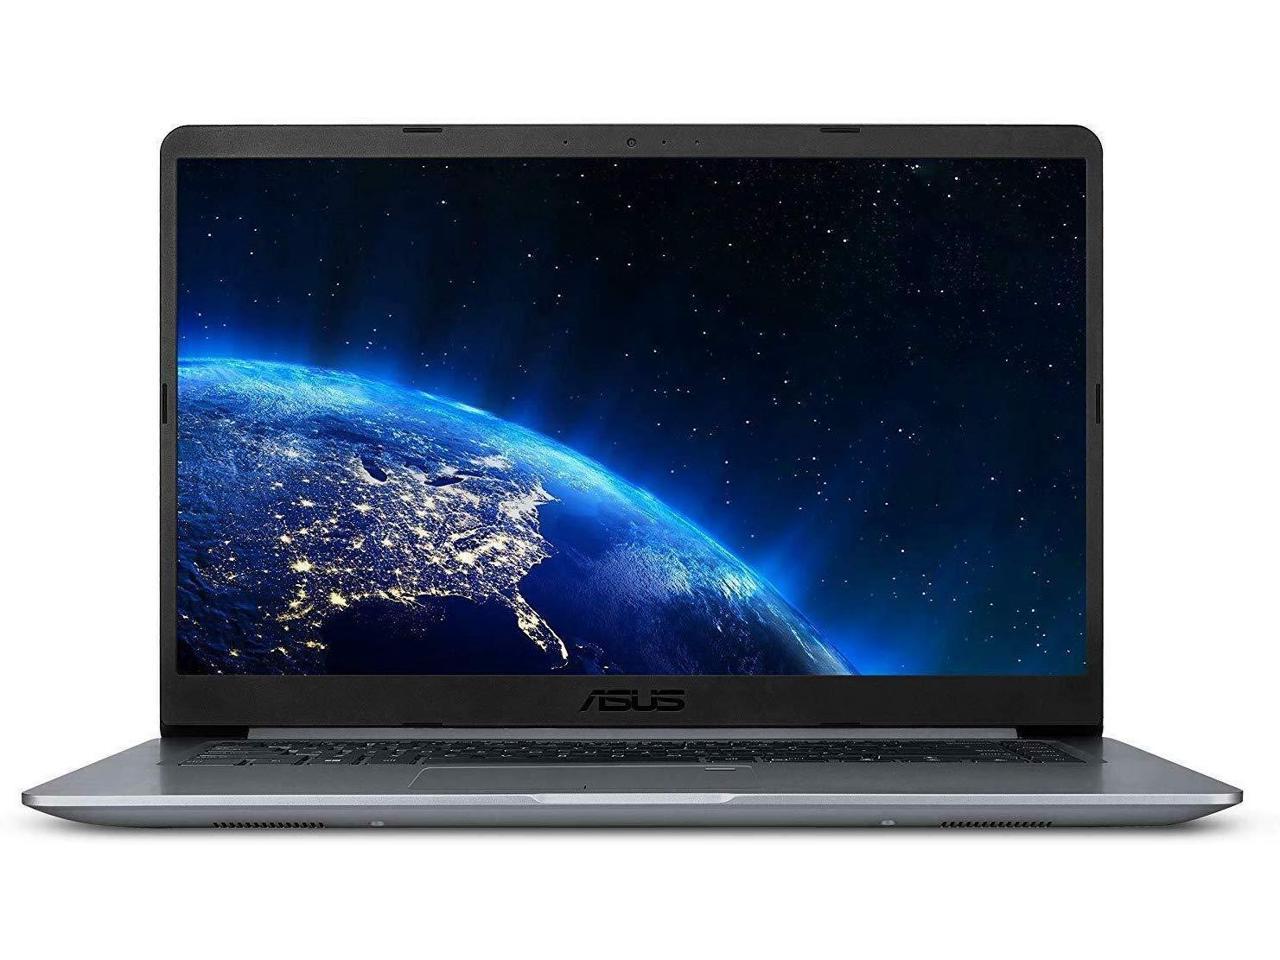 Newest Asus VivoBook Thin & Lightweight Laptop (16G DDR4/512G SSD)|15.6" Full HD(1920x1080) WideView display| AMD Quad Core A12-9720P Processor| Wi-Fi AC|Fingerprint Reader|HDMI |Windows 10 in S Mode